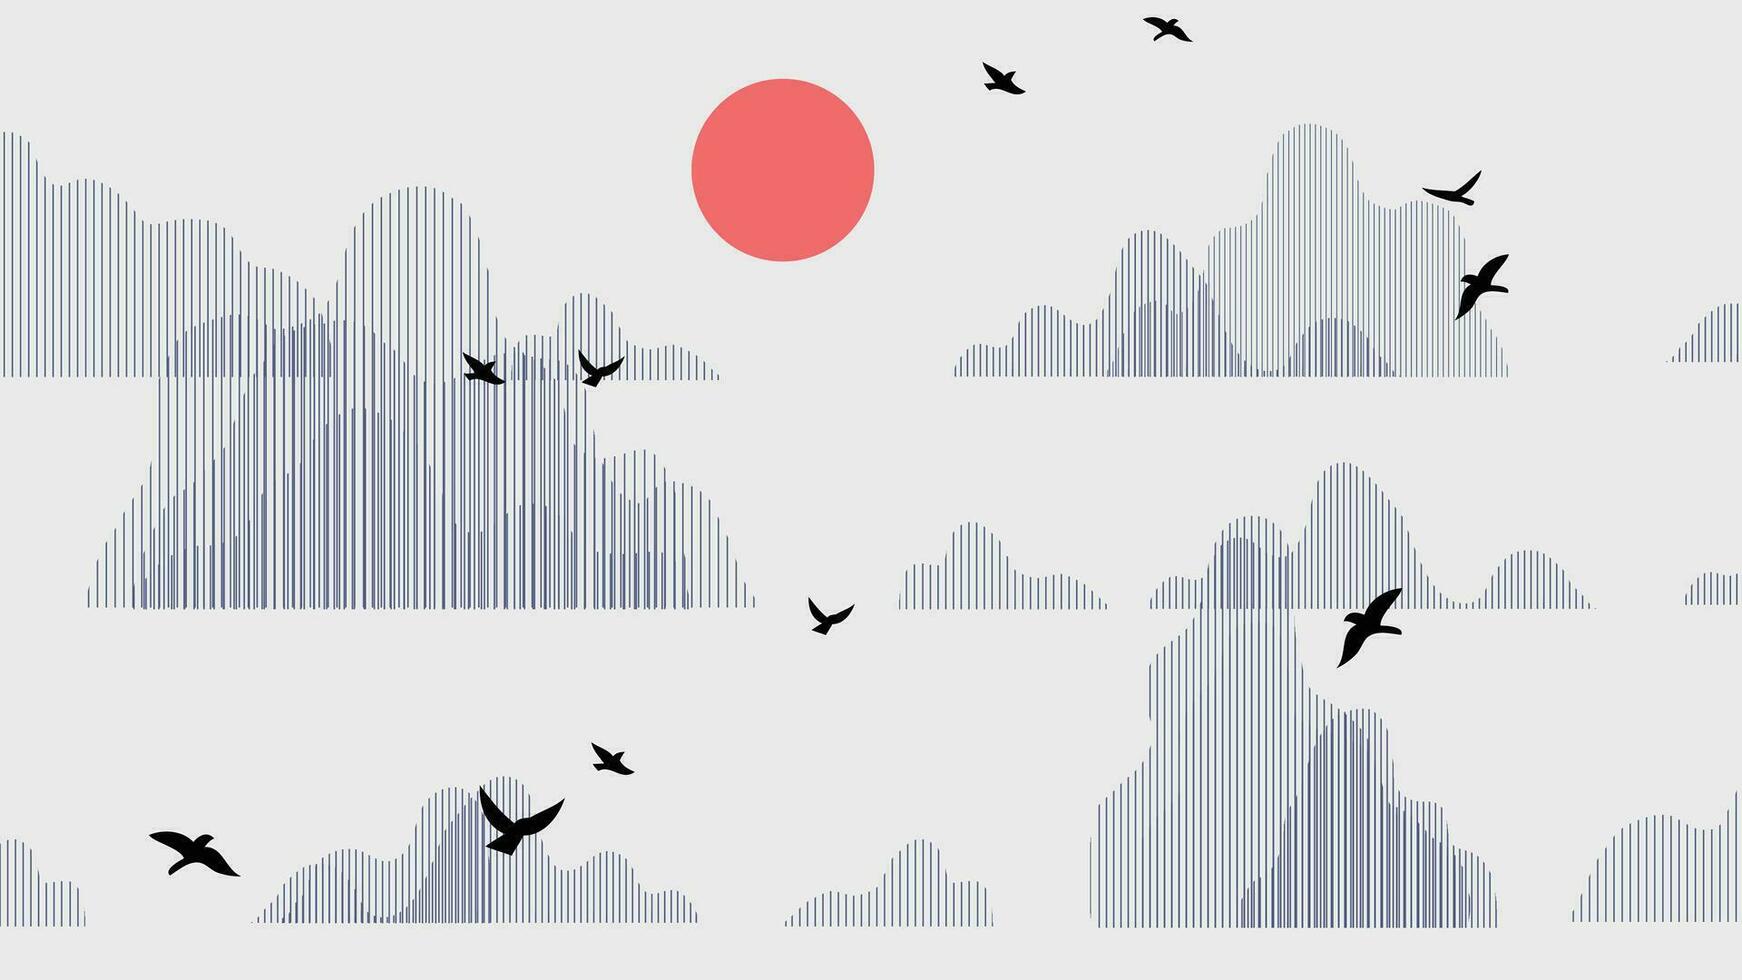 Abstract mountain background vector. Mountain landscape with line art pattern, sun, bird, halftone. Grunge noise hills art wallpaper design for print, wall art, cover and interior. vector